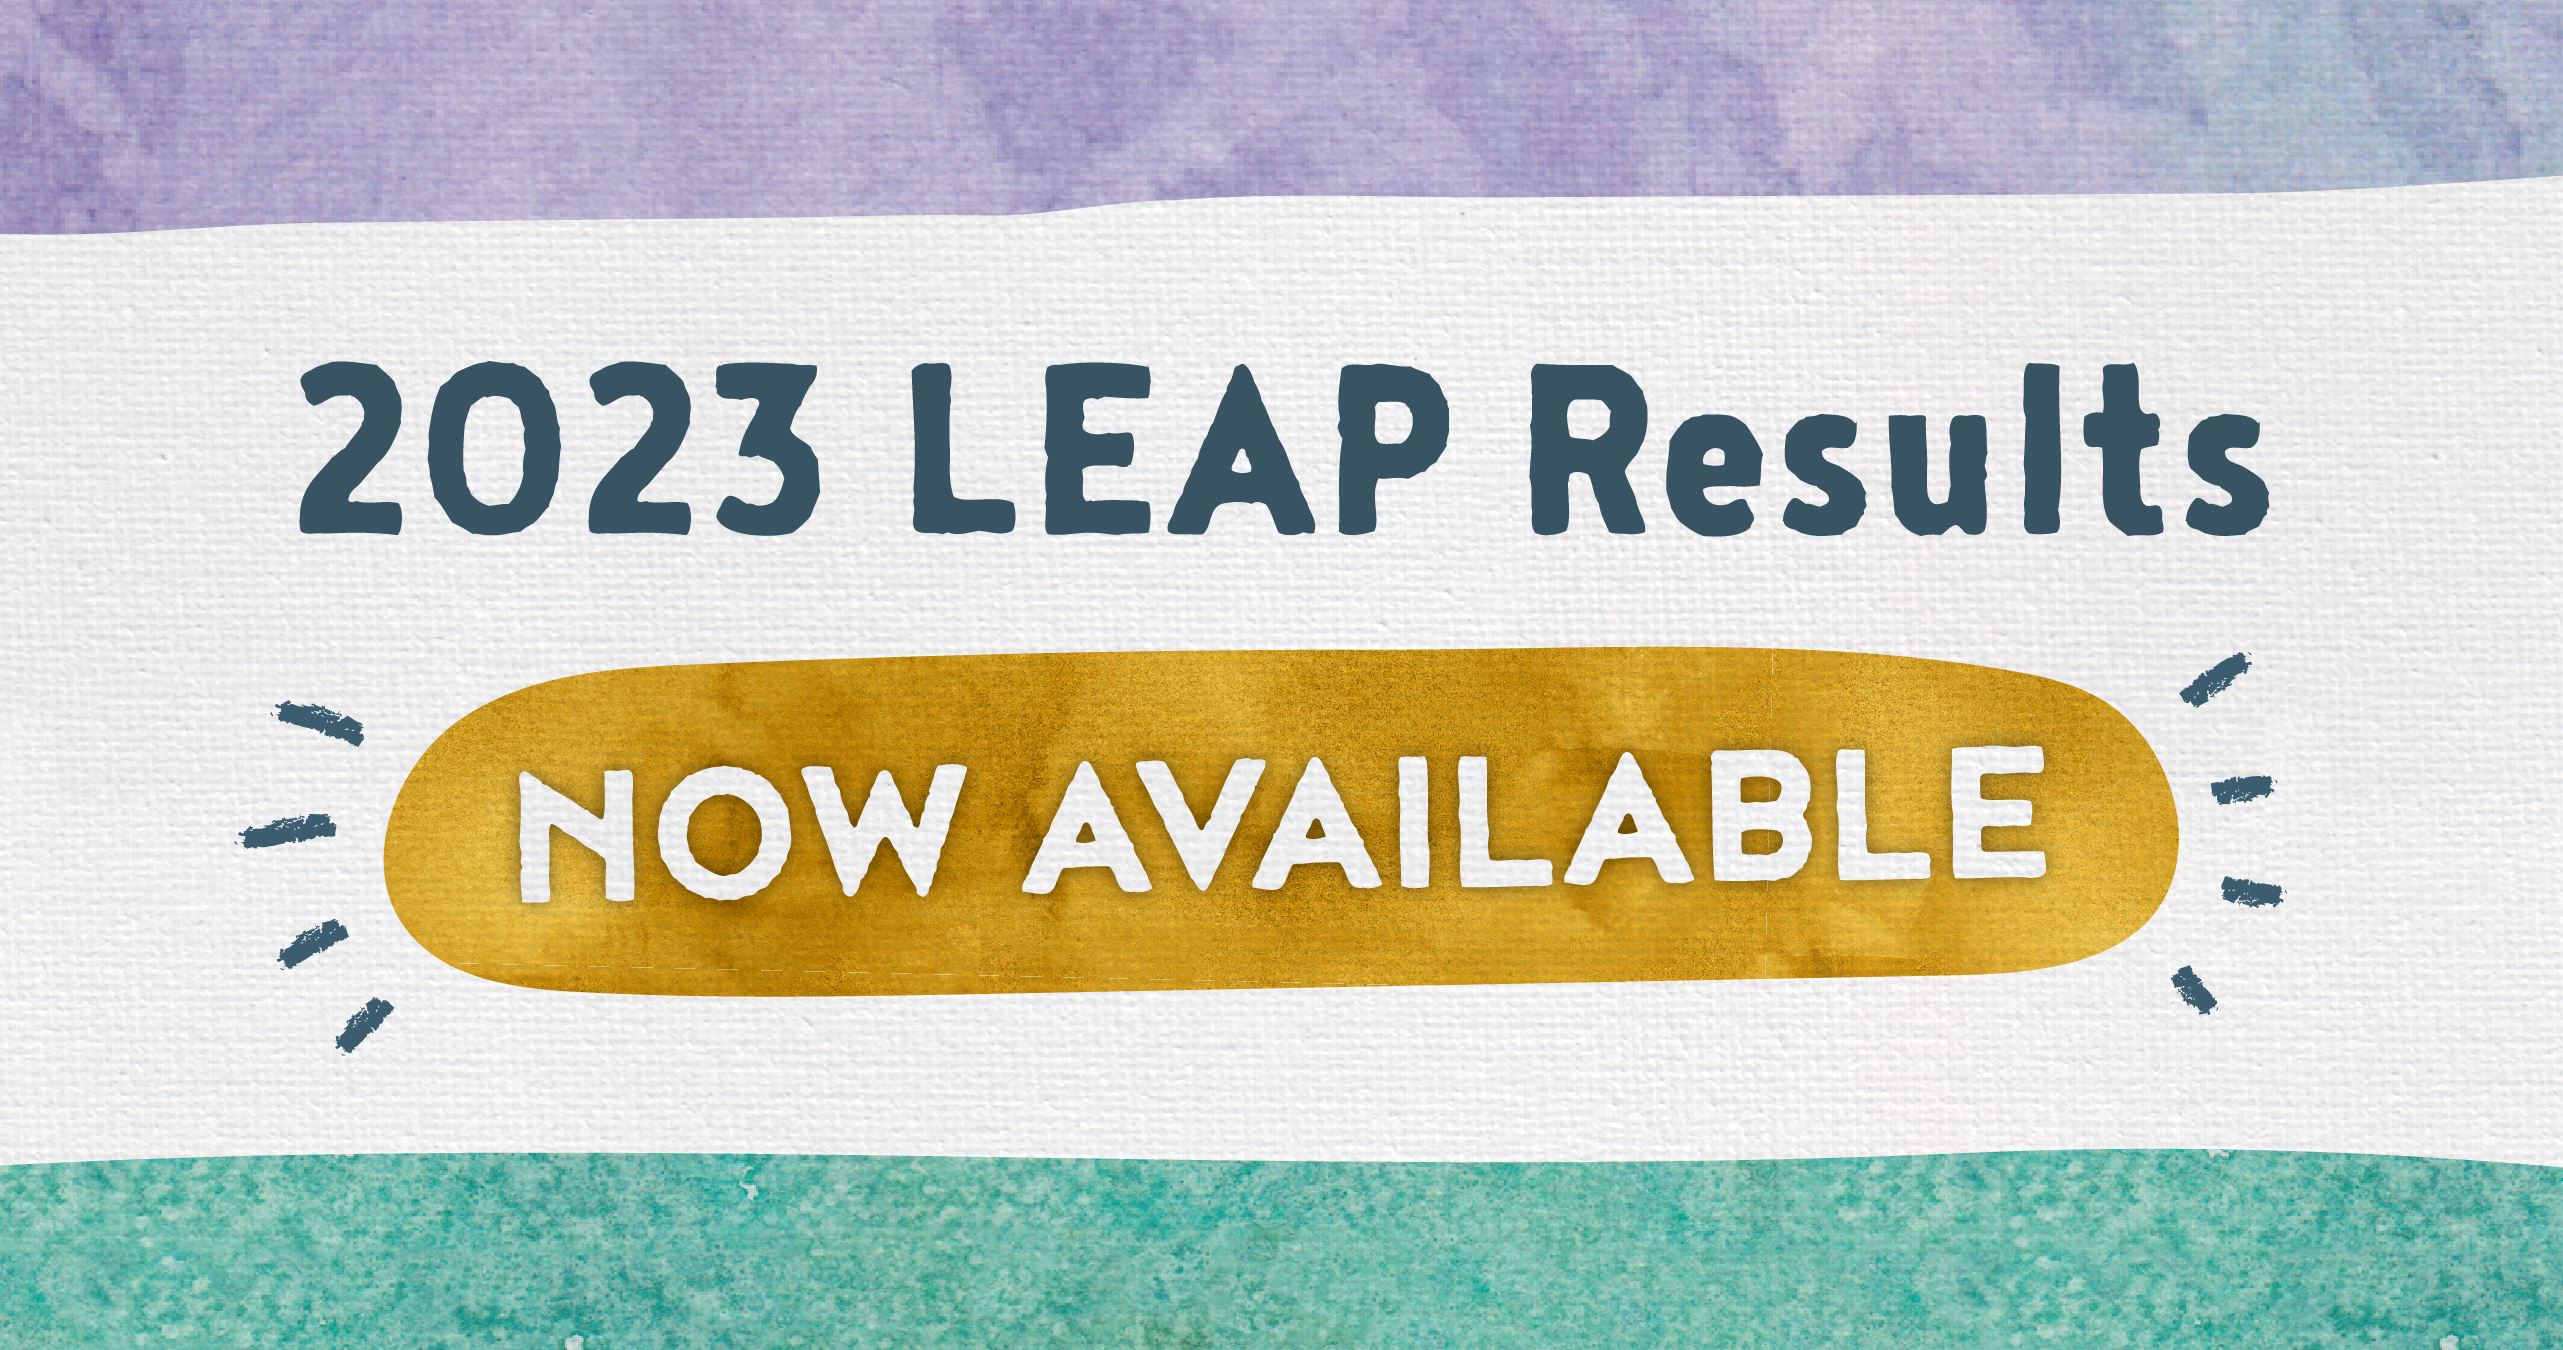 2023 LEAP Results Now Available